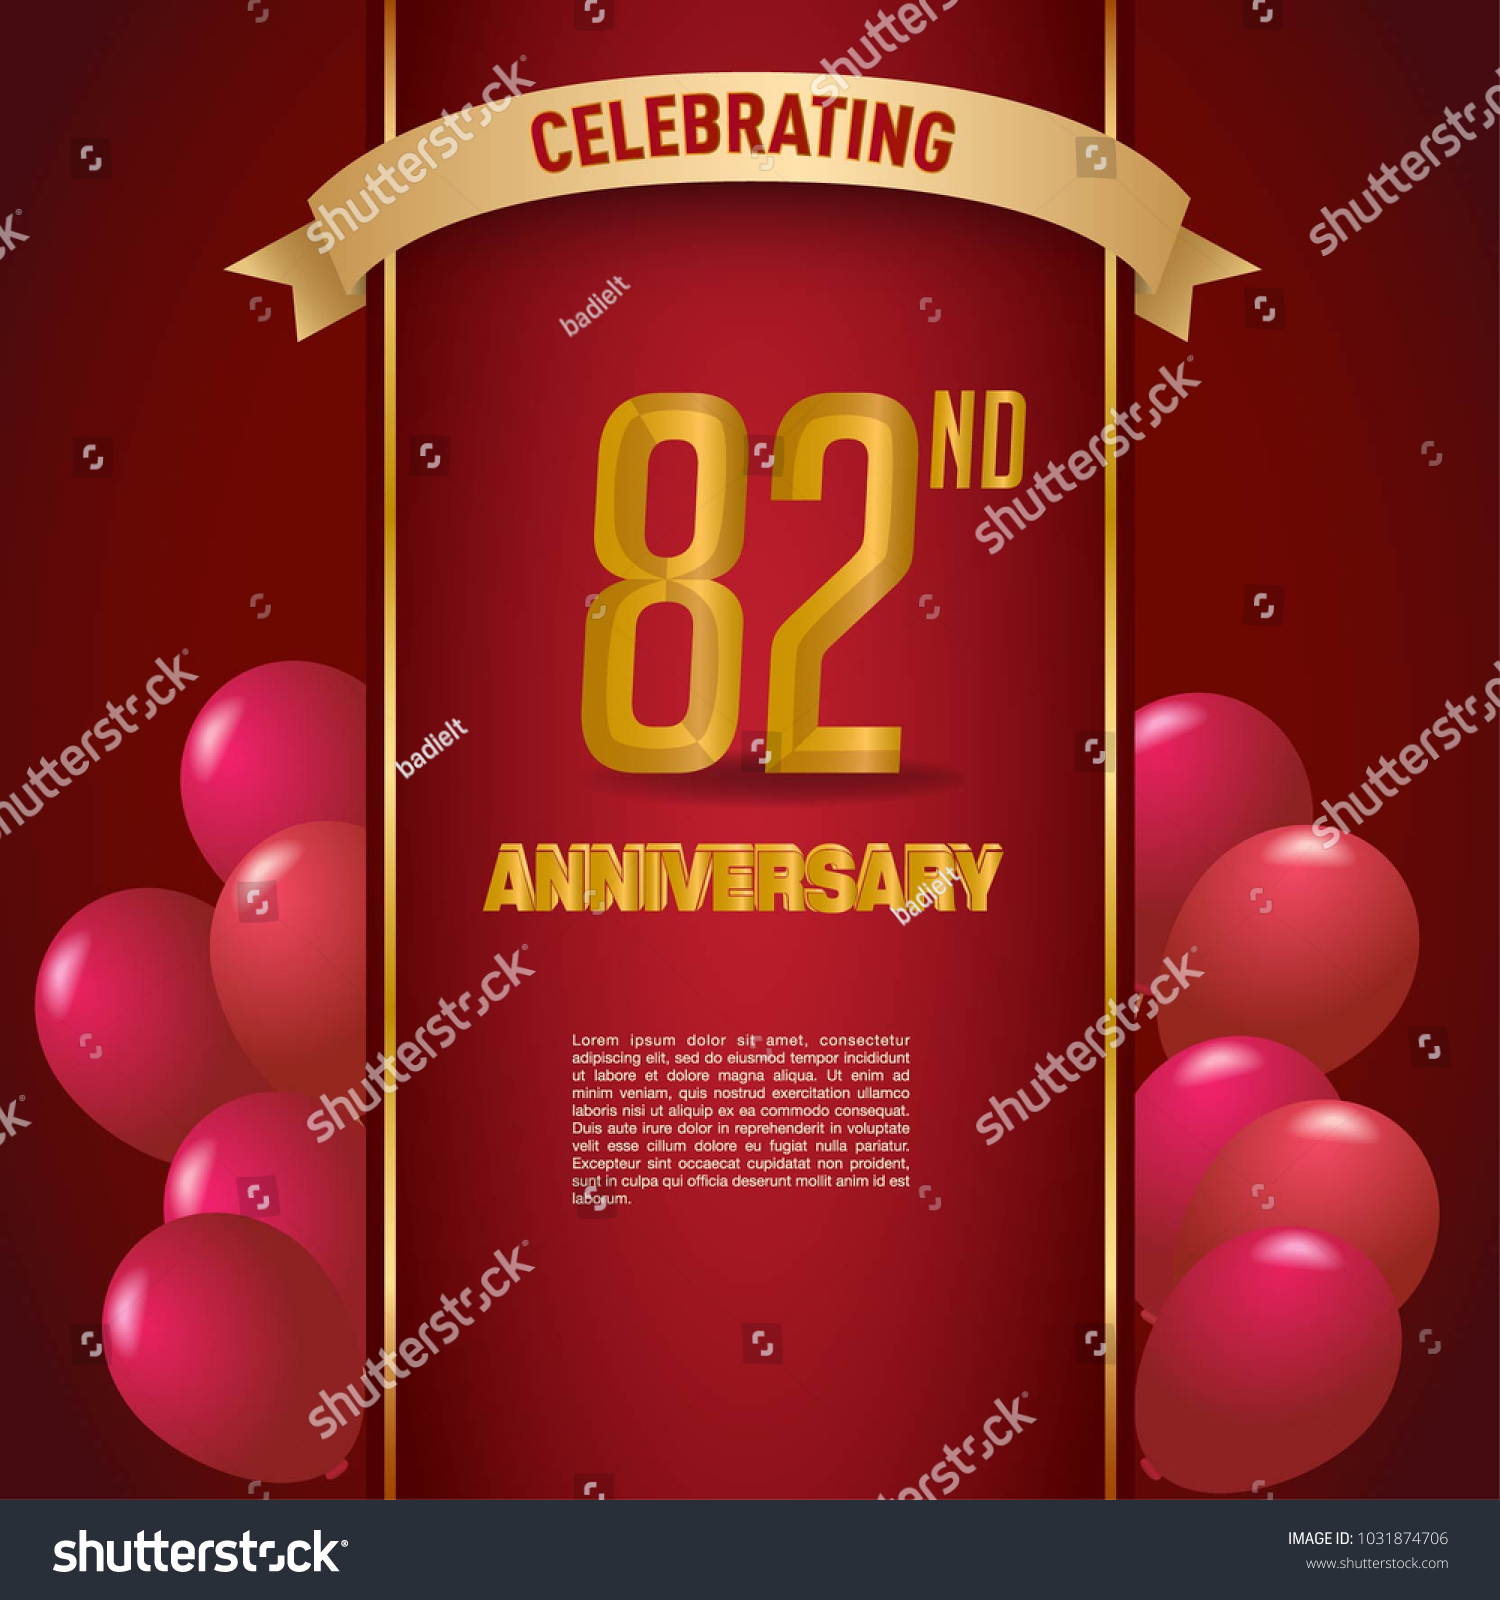 anniversary-card-design-template-red-background-stock-vector-royalty